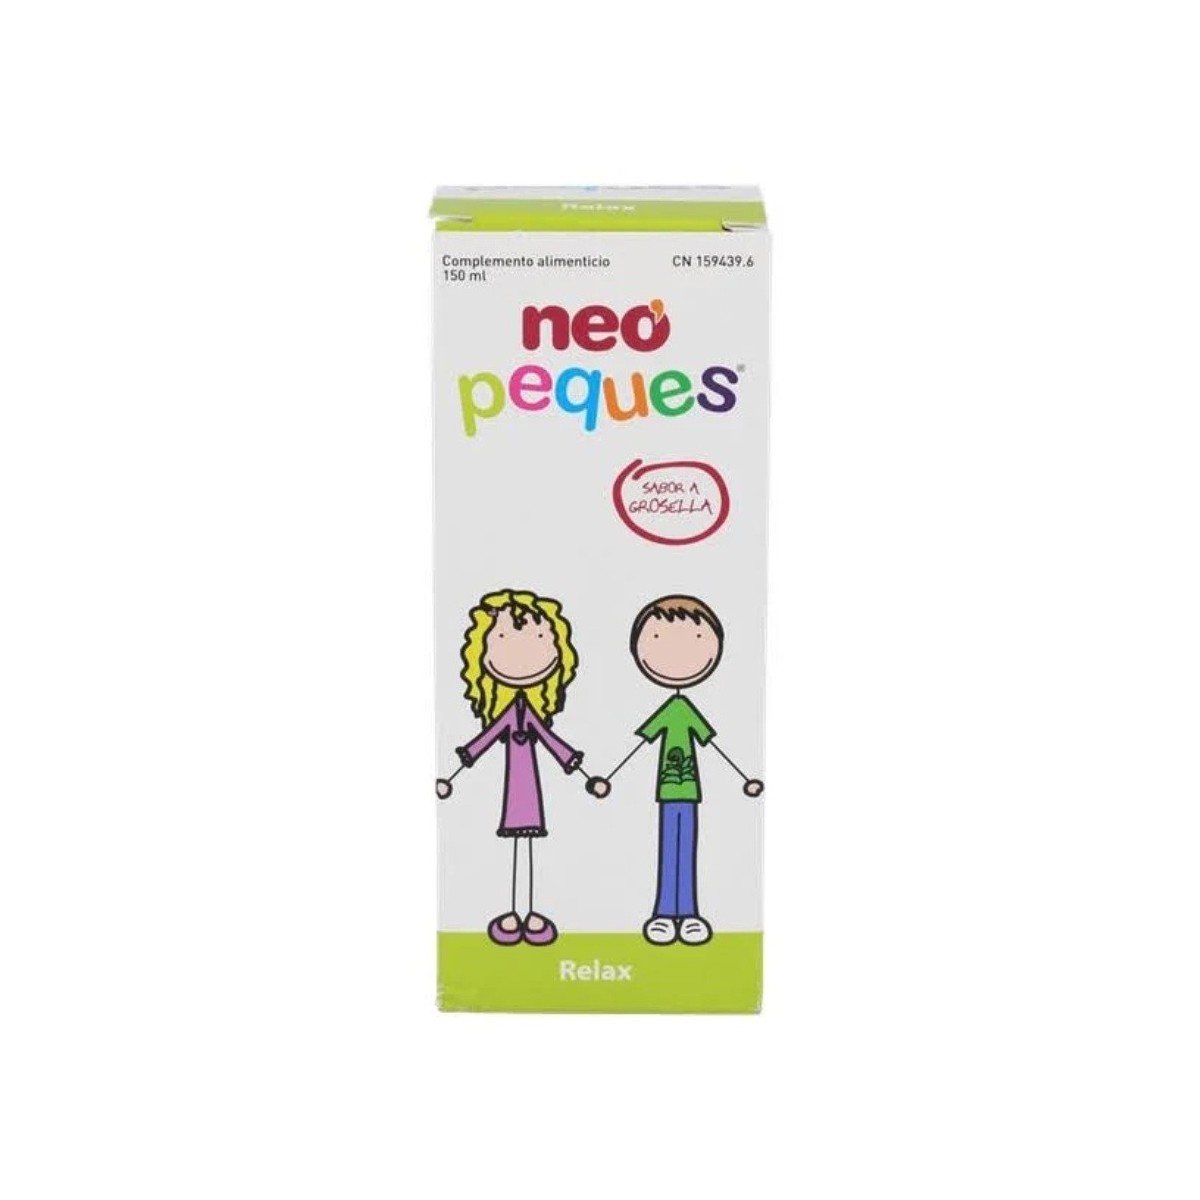 neo peques relax 150 ml